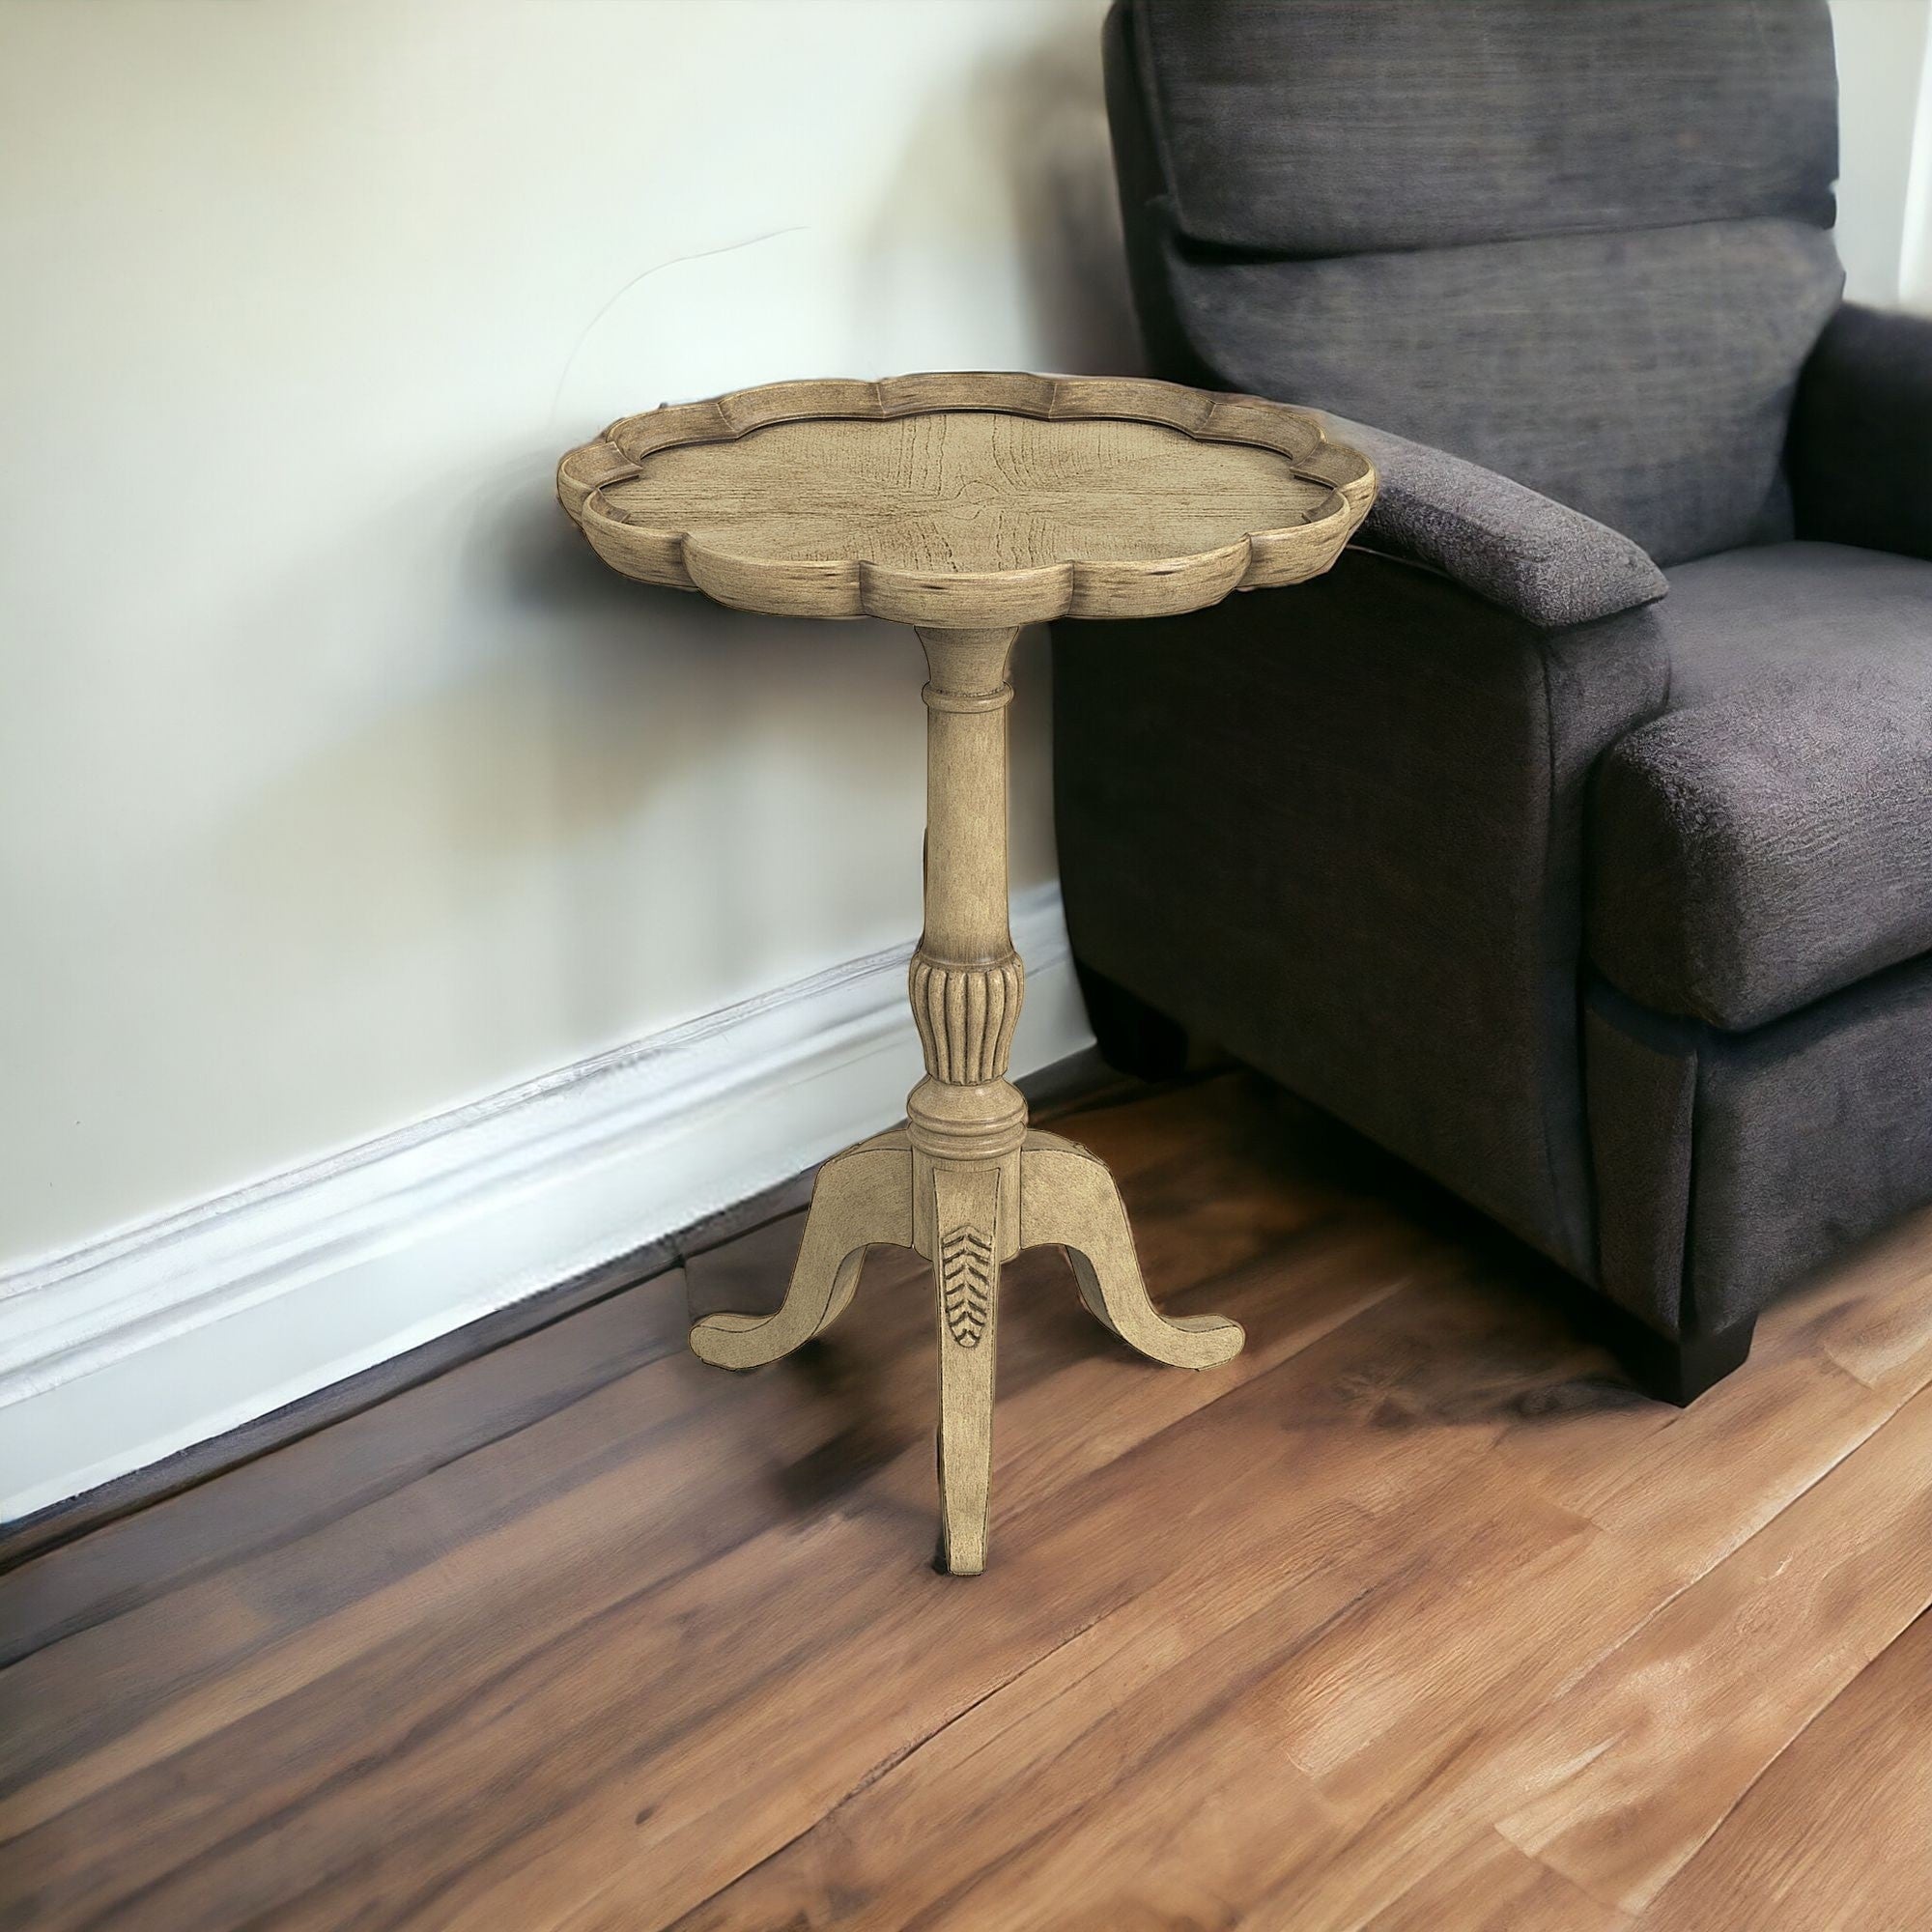 26" Beige Manufactured Wood Round End Table